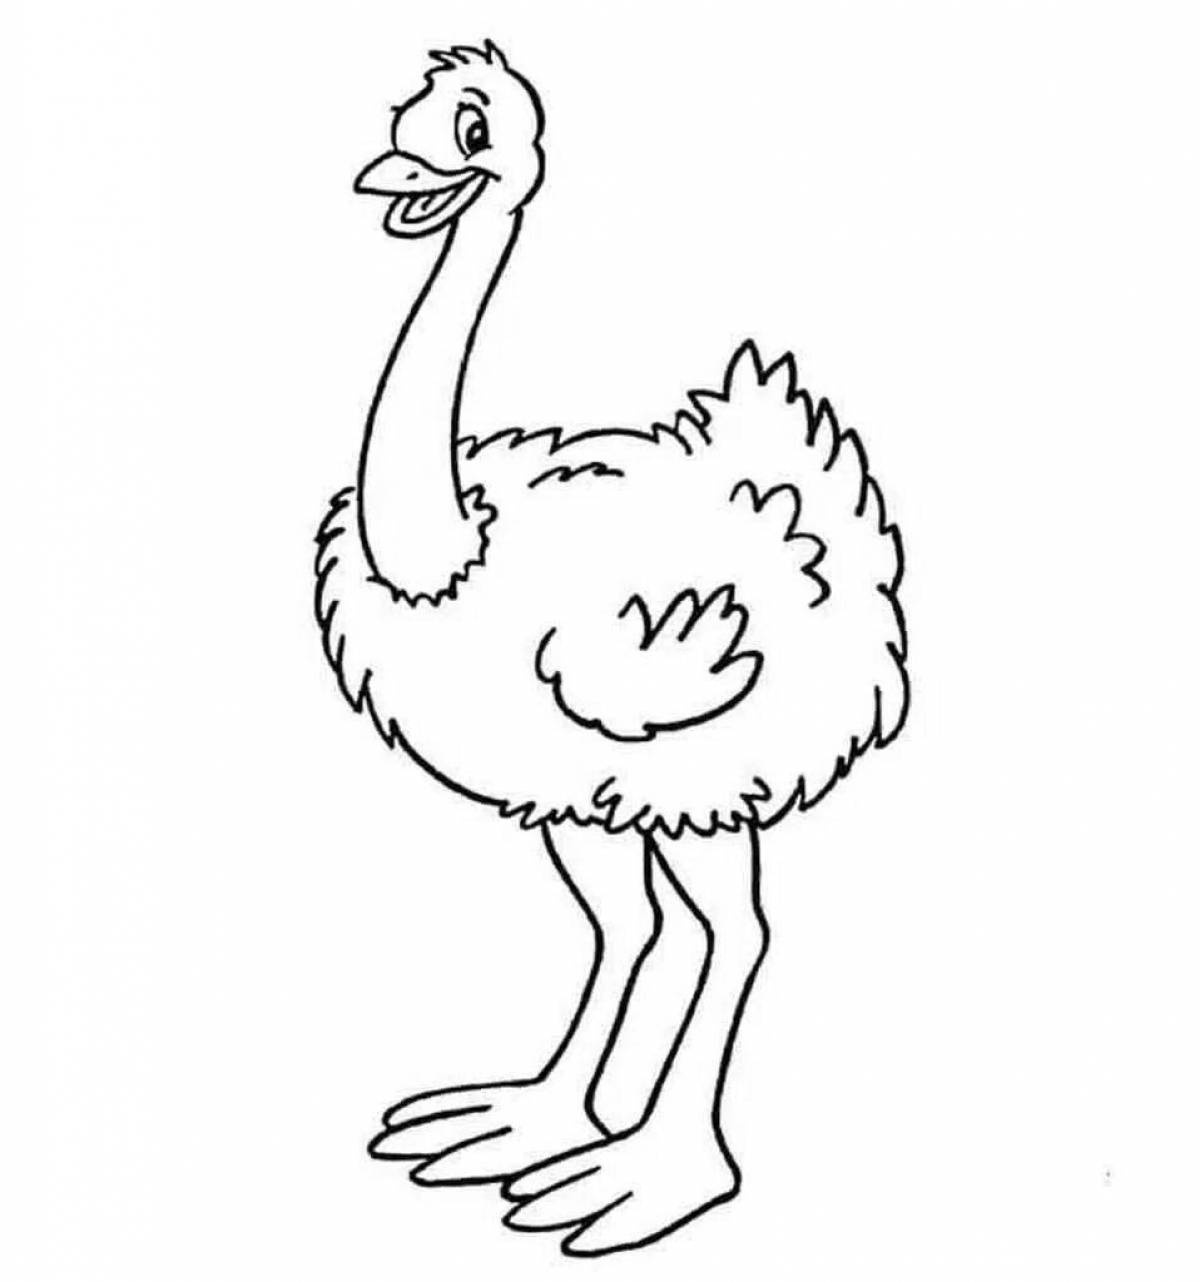 A wonderful ostrich coloring for children